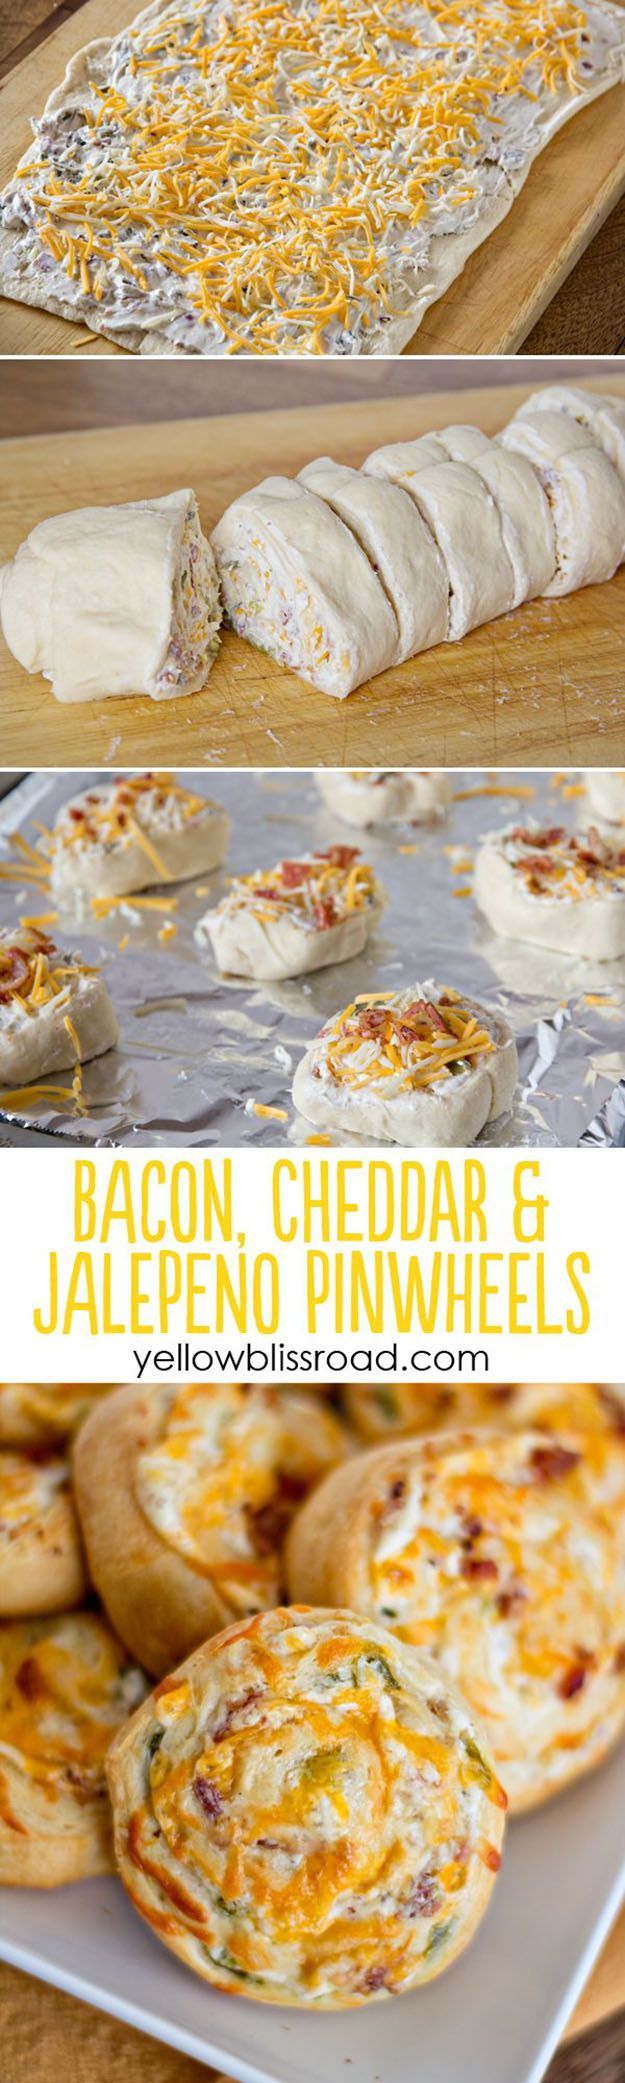 Cheap Party Food Ideas |Easy DIY Recipe for Bacon & Cheese Pinwheels | DIY Projects and Crafts by DIY JOY